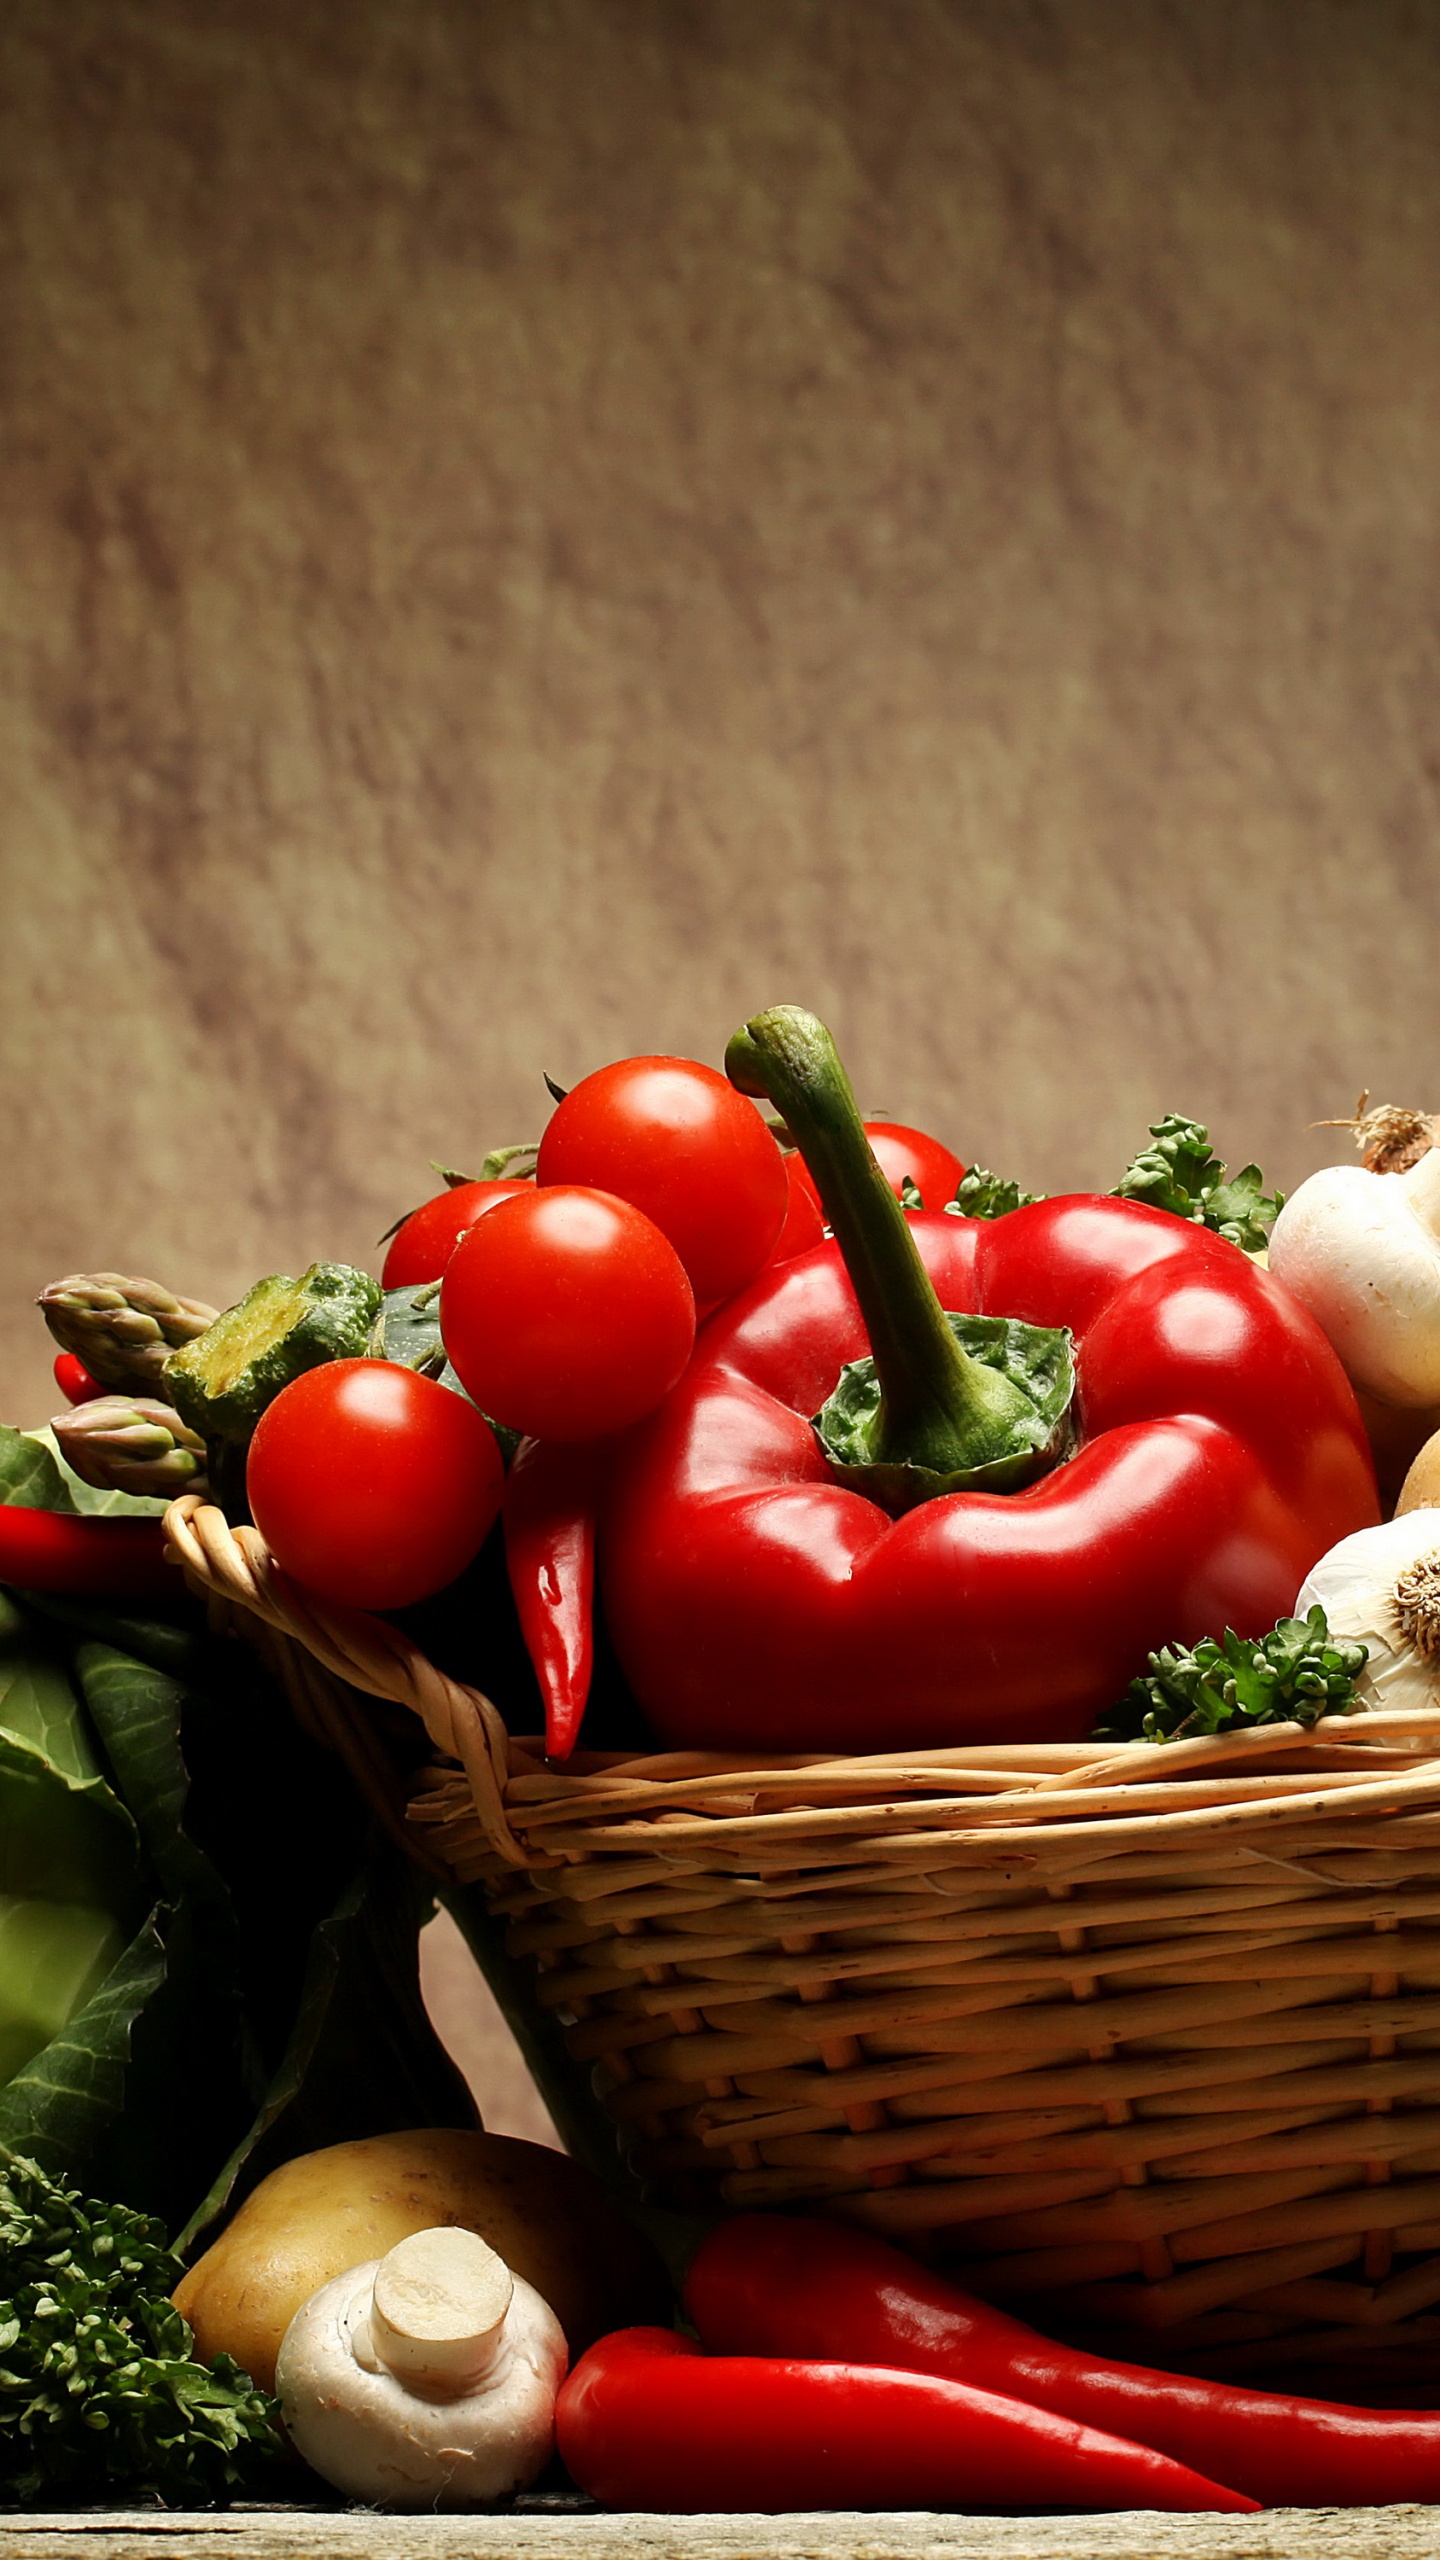 Red Tomatoes and Green Vegetable on Brown Woven Basket. Wallpaper in 1440x2560 Resolution